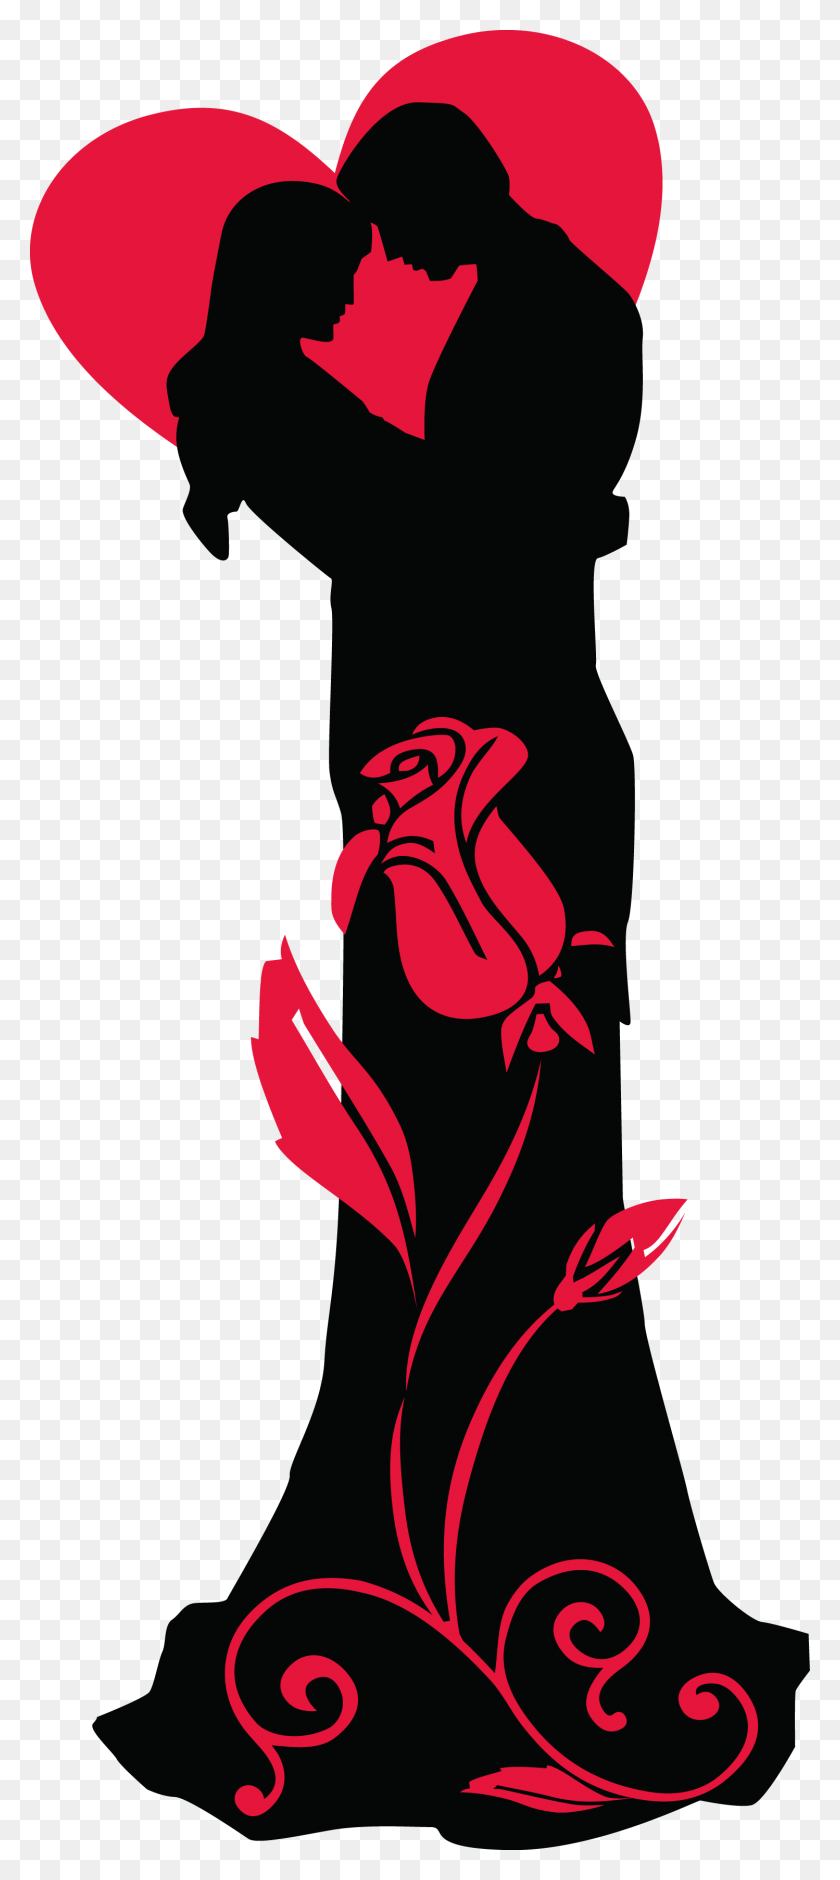 1498x3497 Transparent Loving Couple Silhouettes With Red Heart And Rose Png - Rose Silhouette PNG